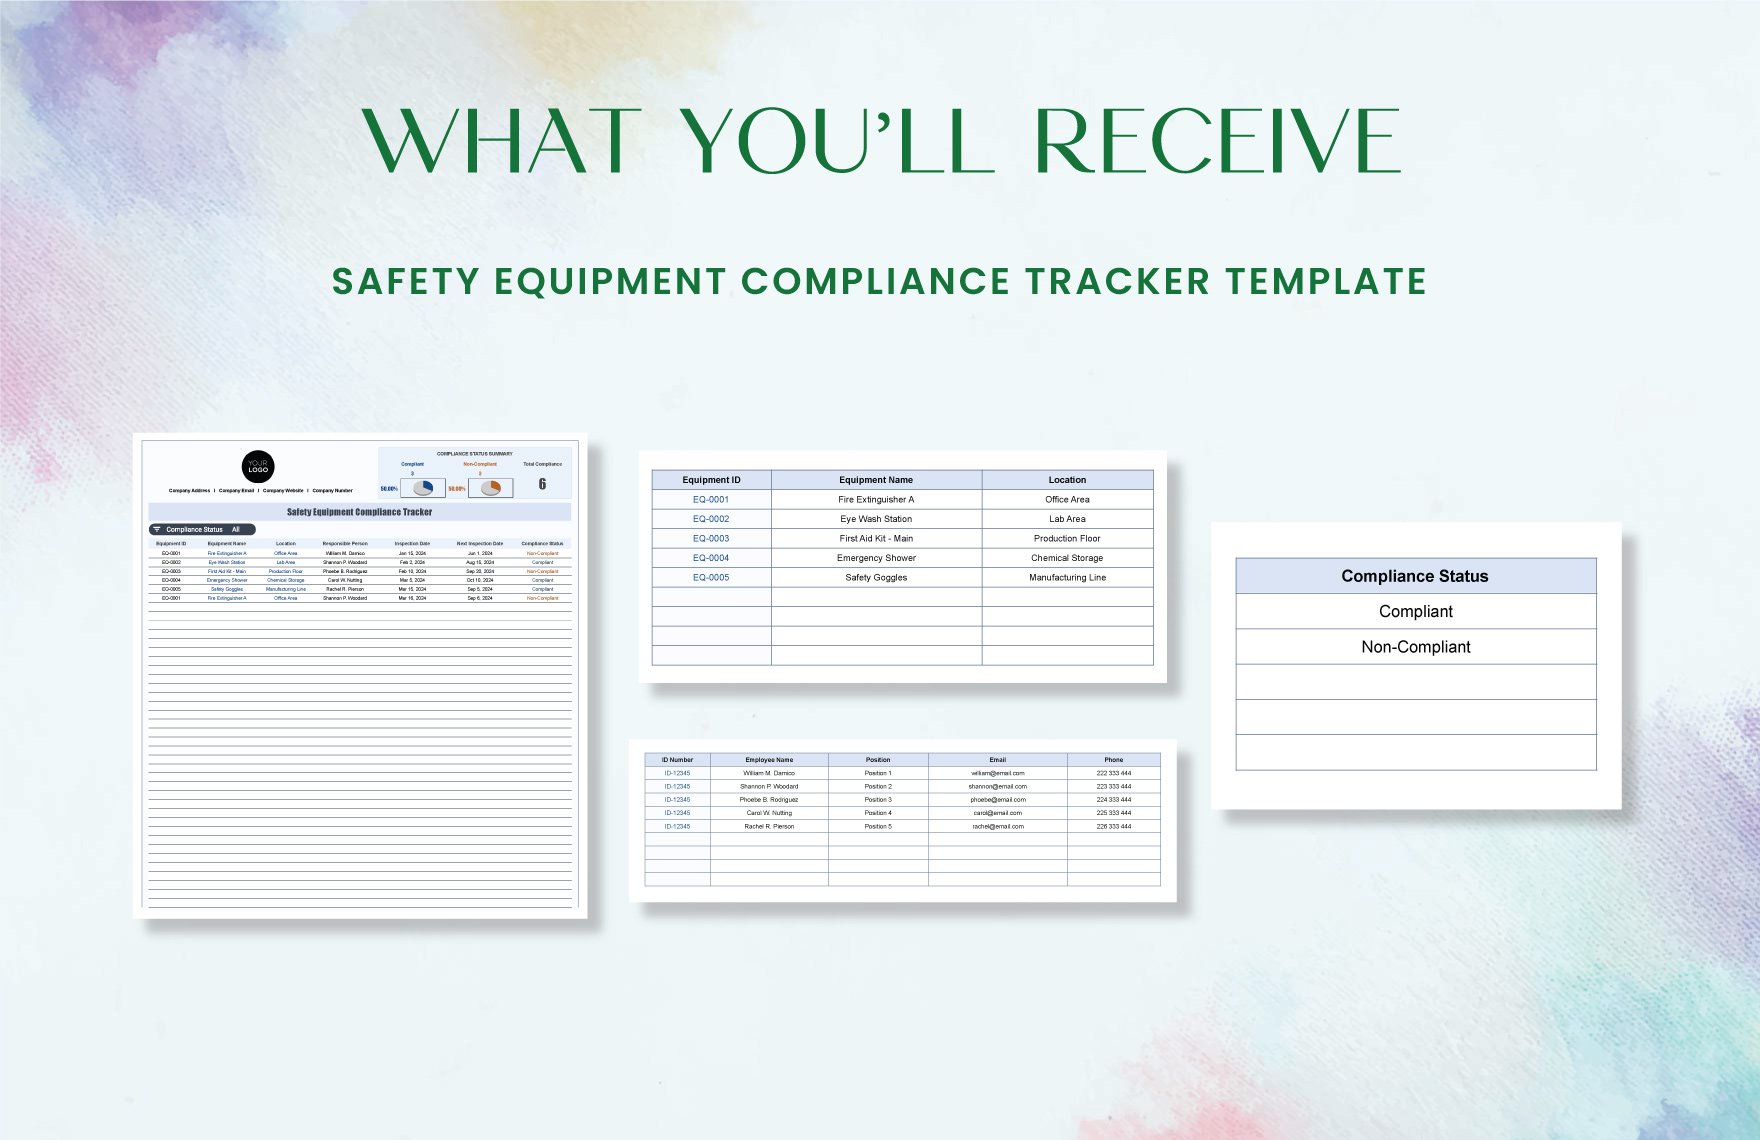 Safety Equipment Compliance Tracker Template